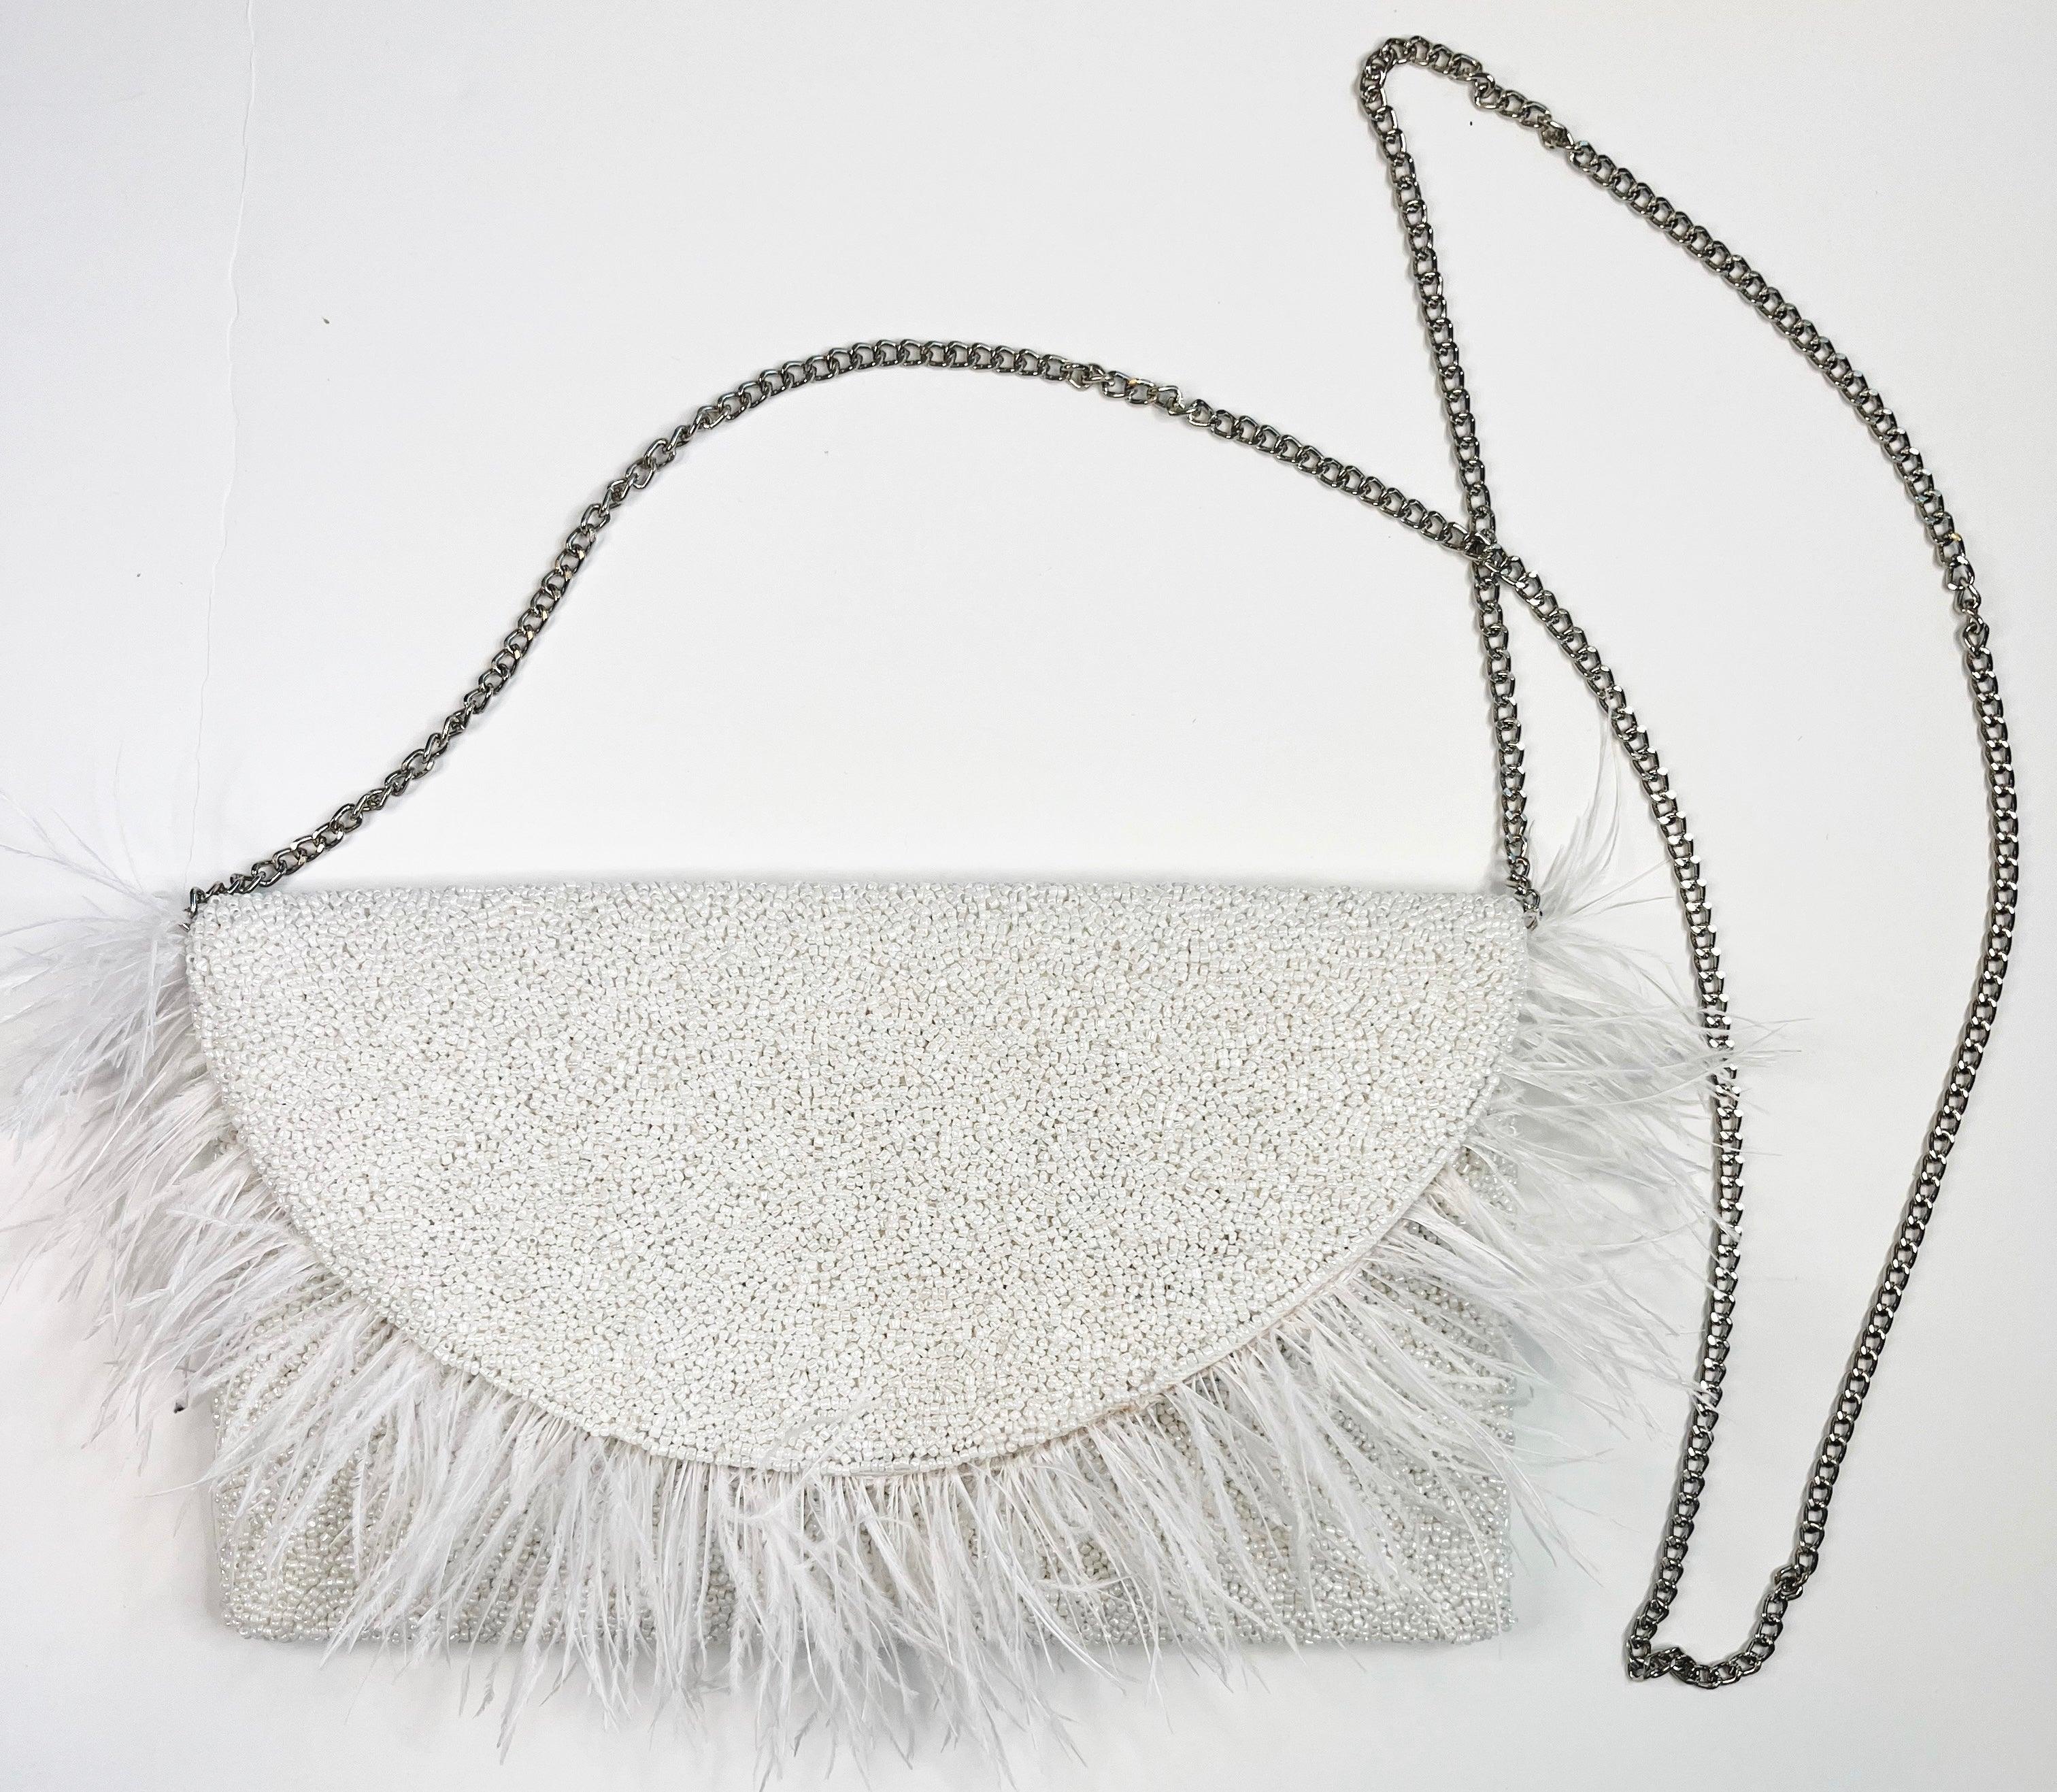 The White Beaded Party Clutch - Mkay Style